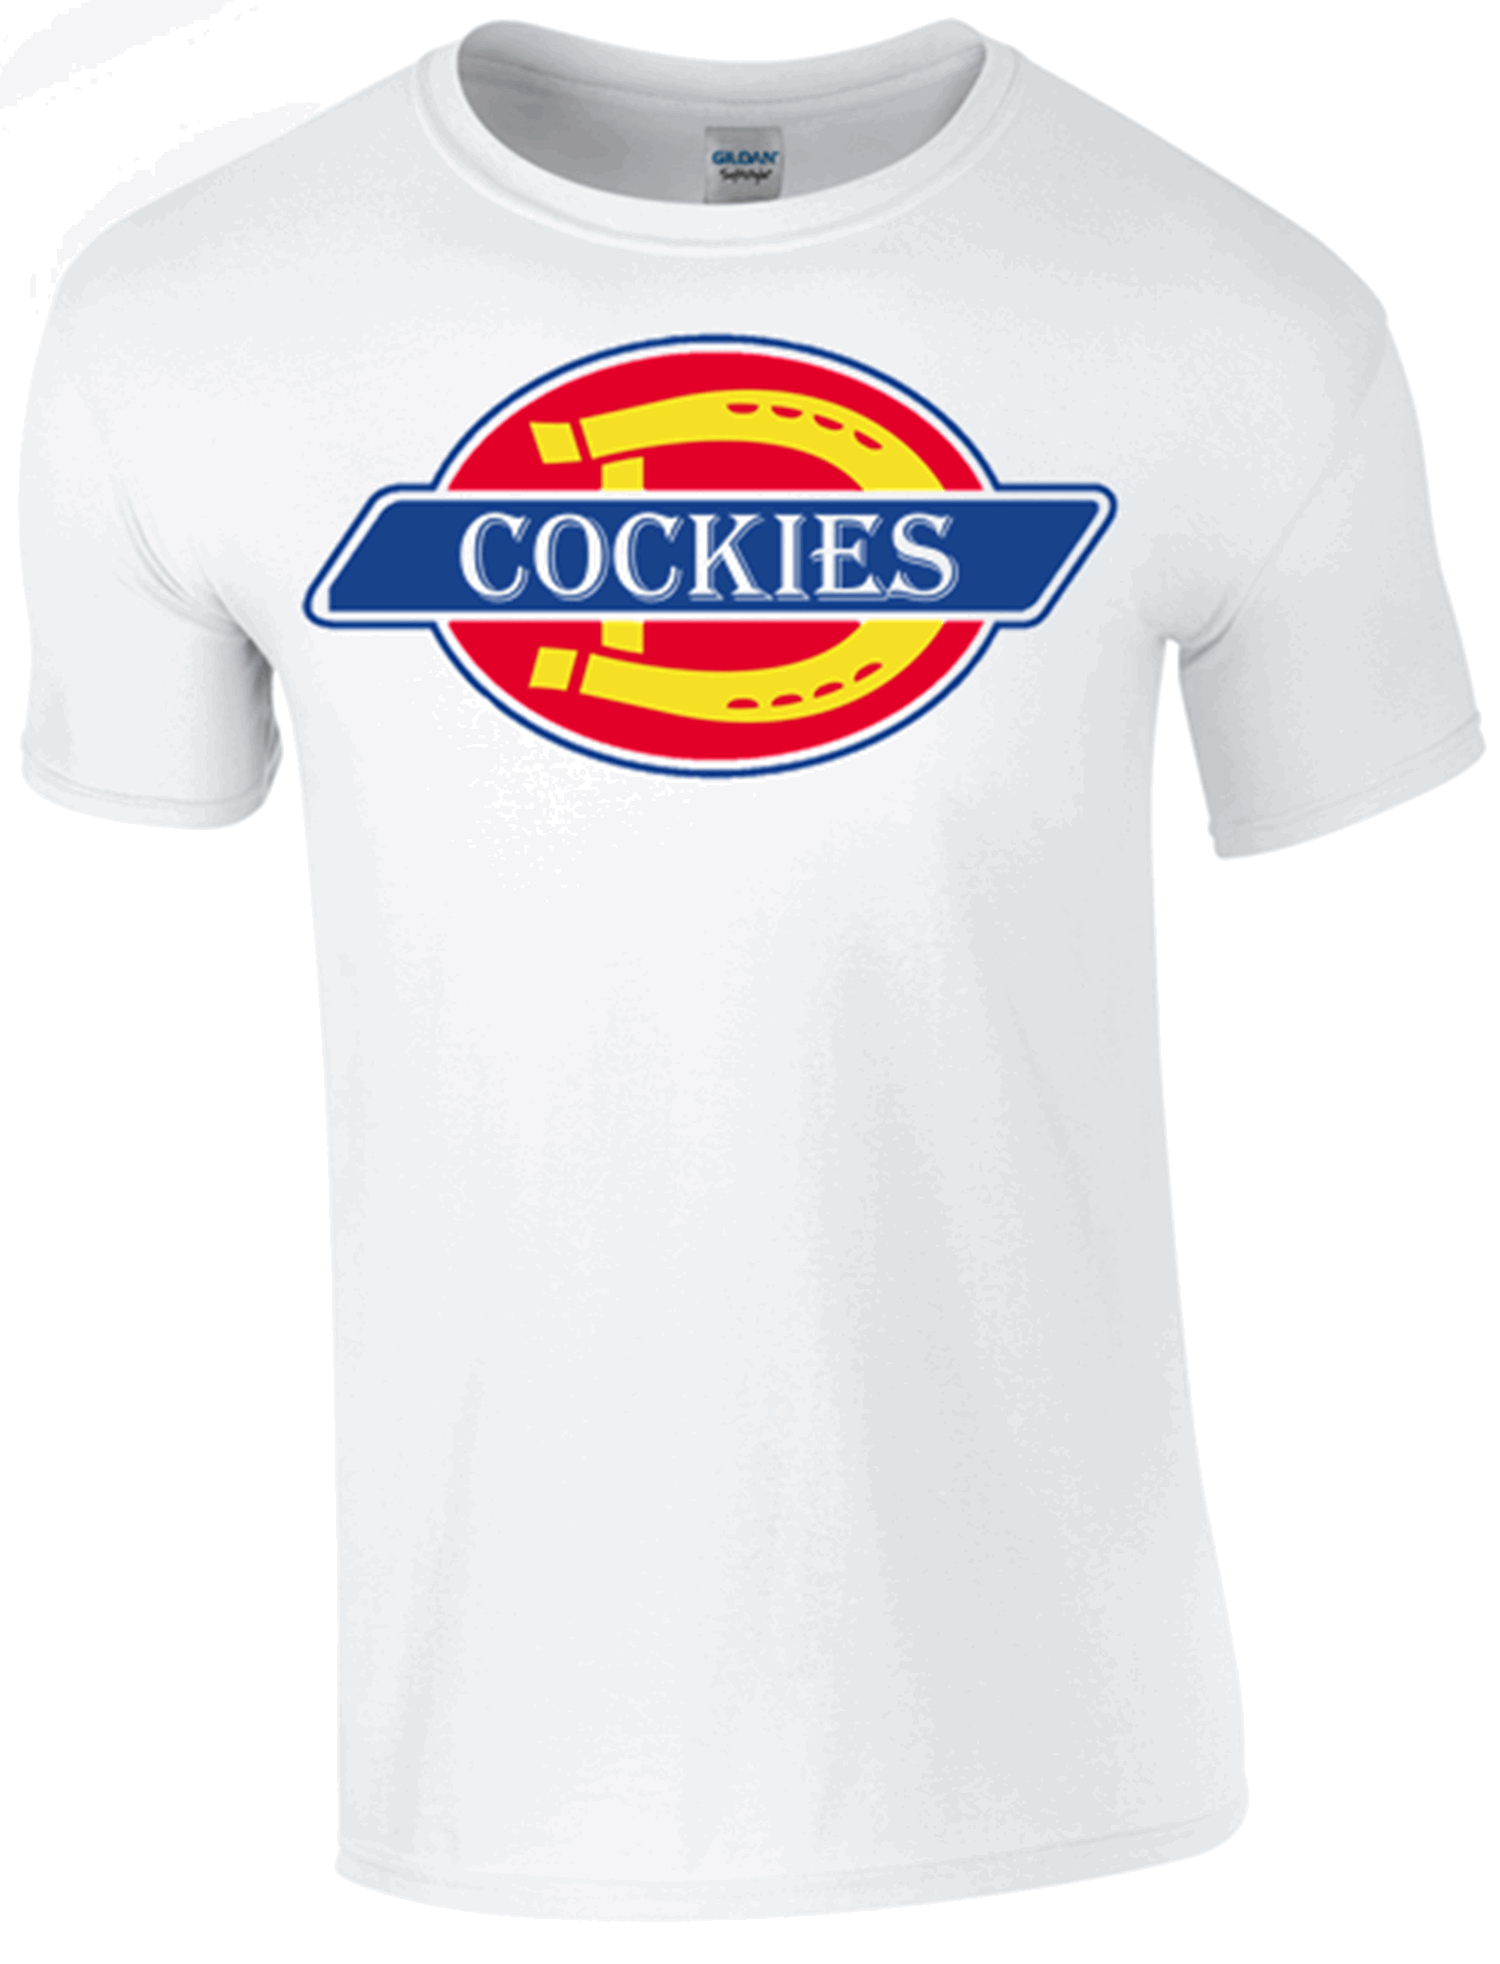 COCKIES T-Shirt - Army 1157 Kit  Veterans Owned Business